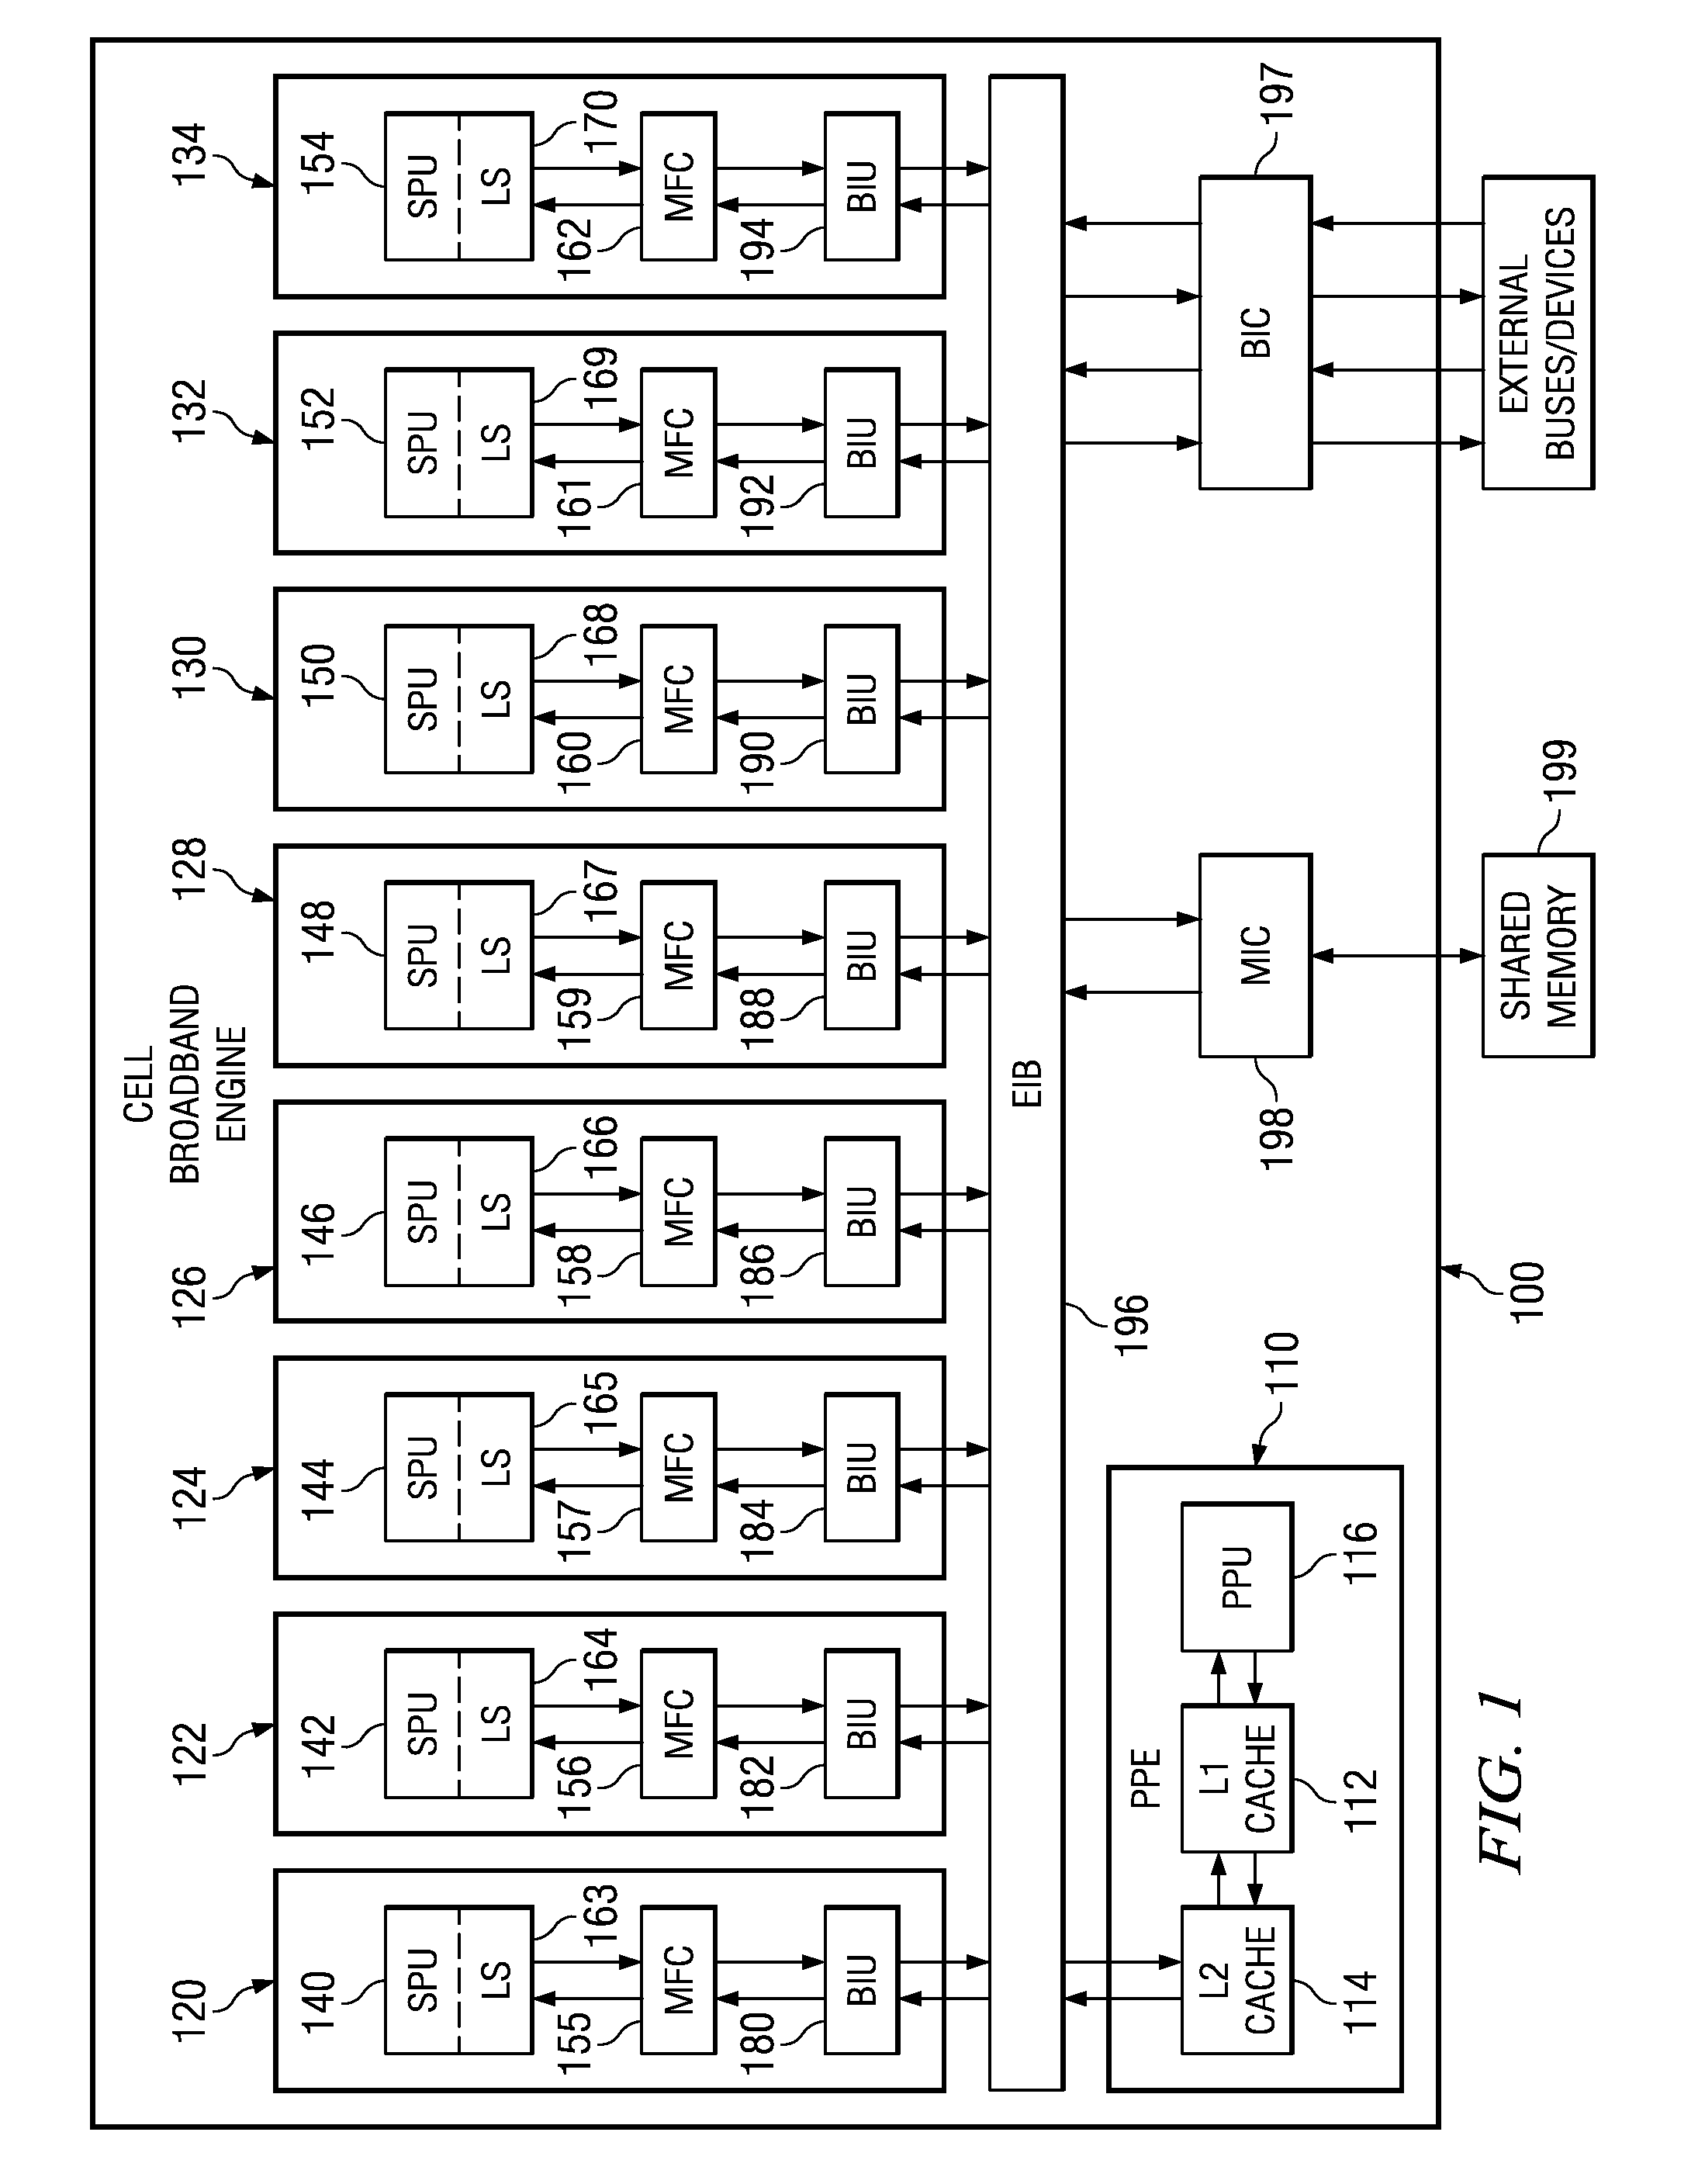 Apparatus and method for ensuring maximum code motion of accesses to DMA buffers